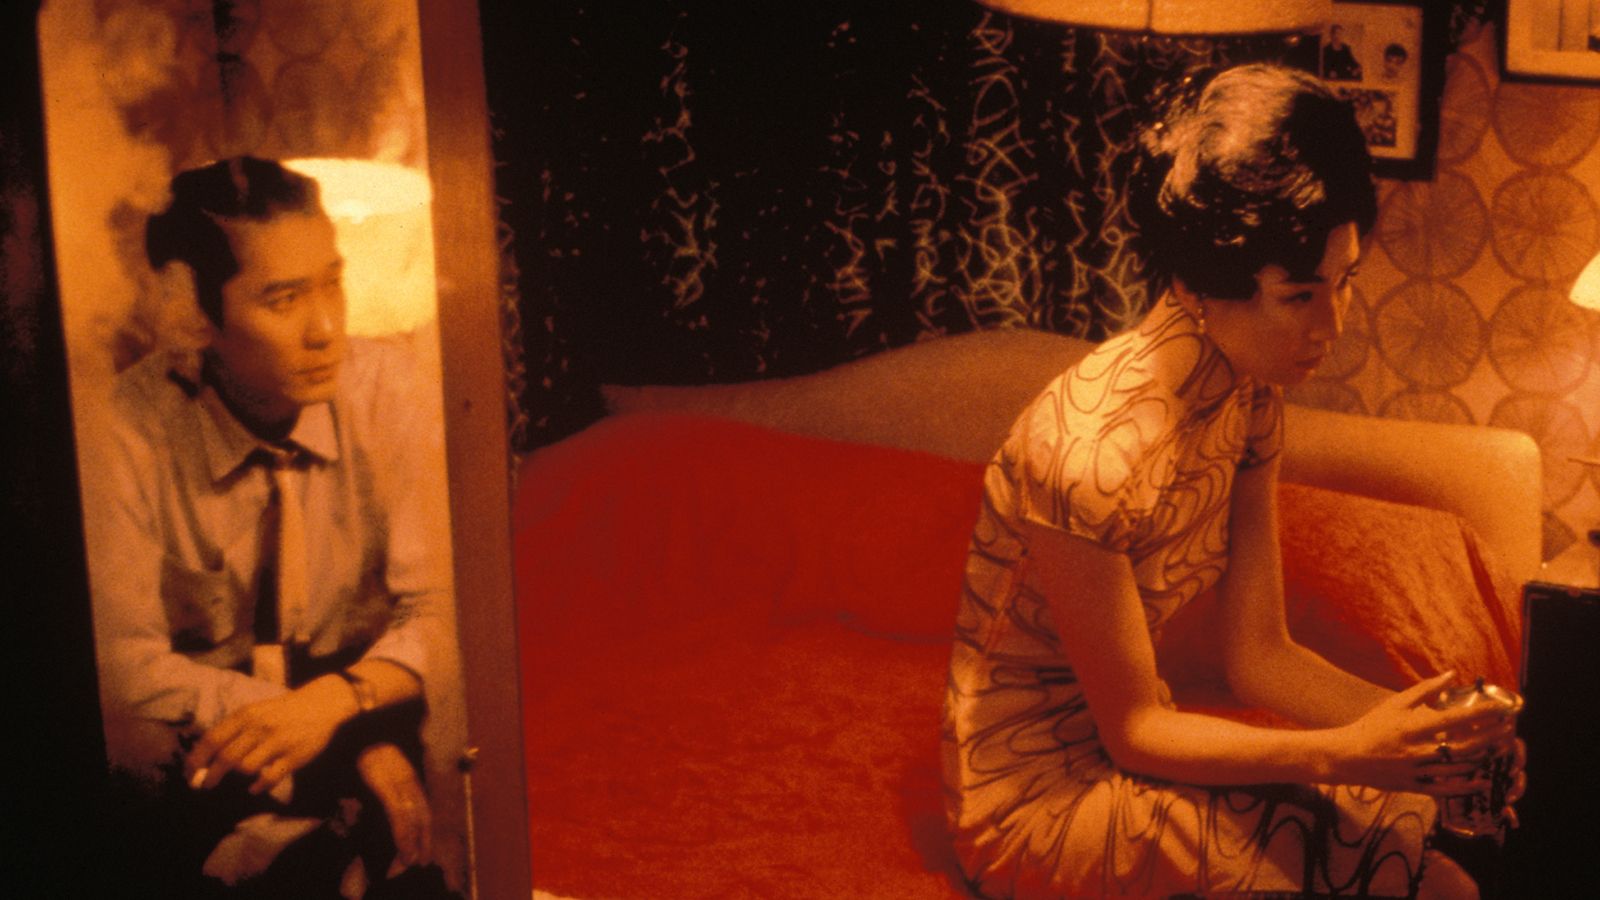 World of Wong Kar Wai: In the Mood for Love